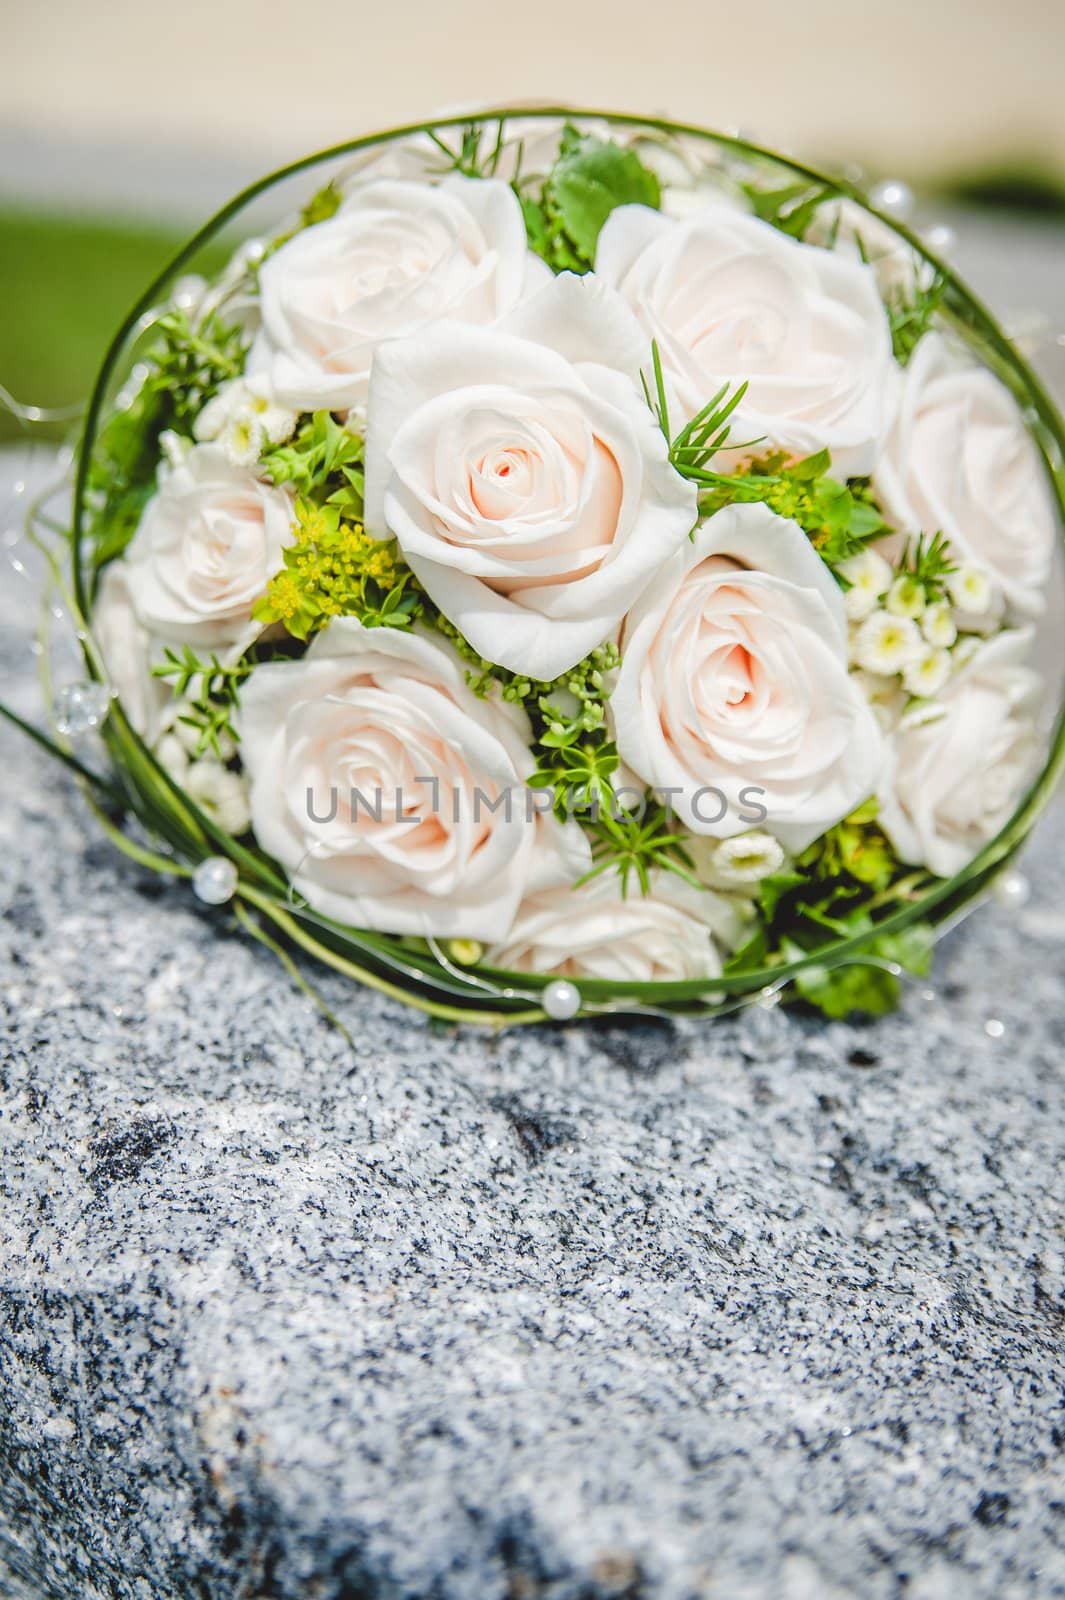 Bridal bouquet with pink roses on a stone